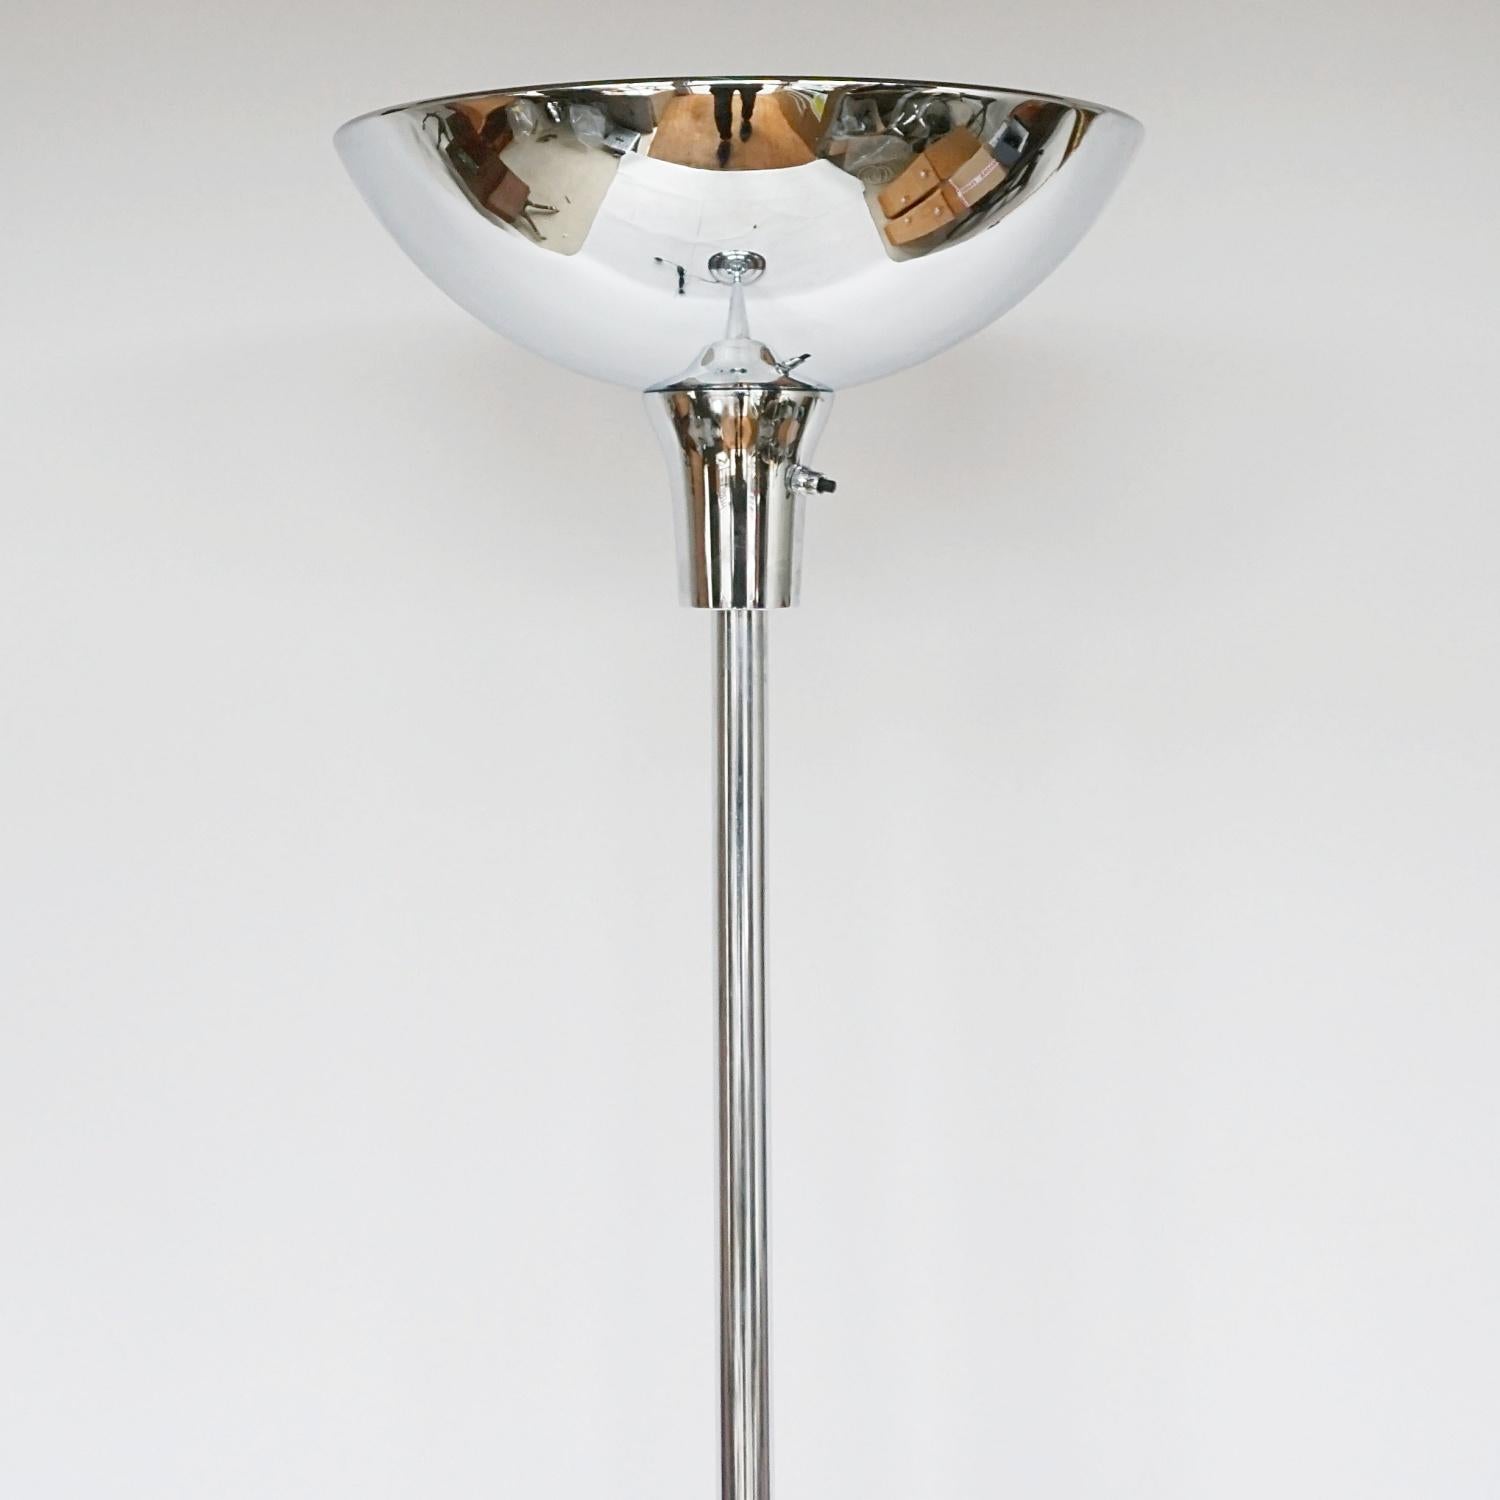 Art Deco Chromed Metal Uplighter In Good Condition For Sale In Forest Row, East Sussex